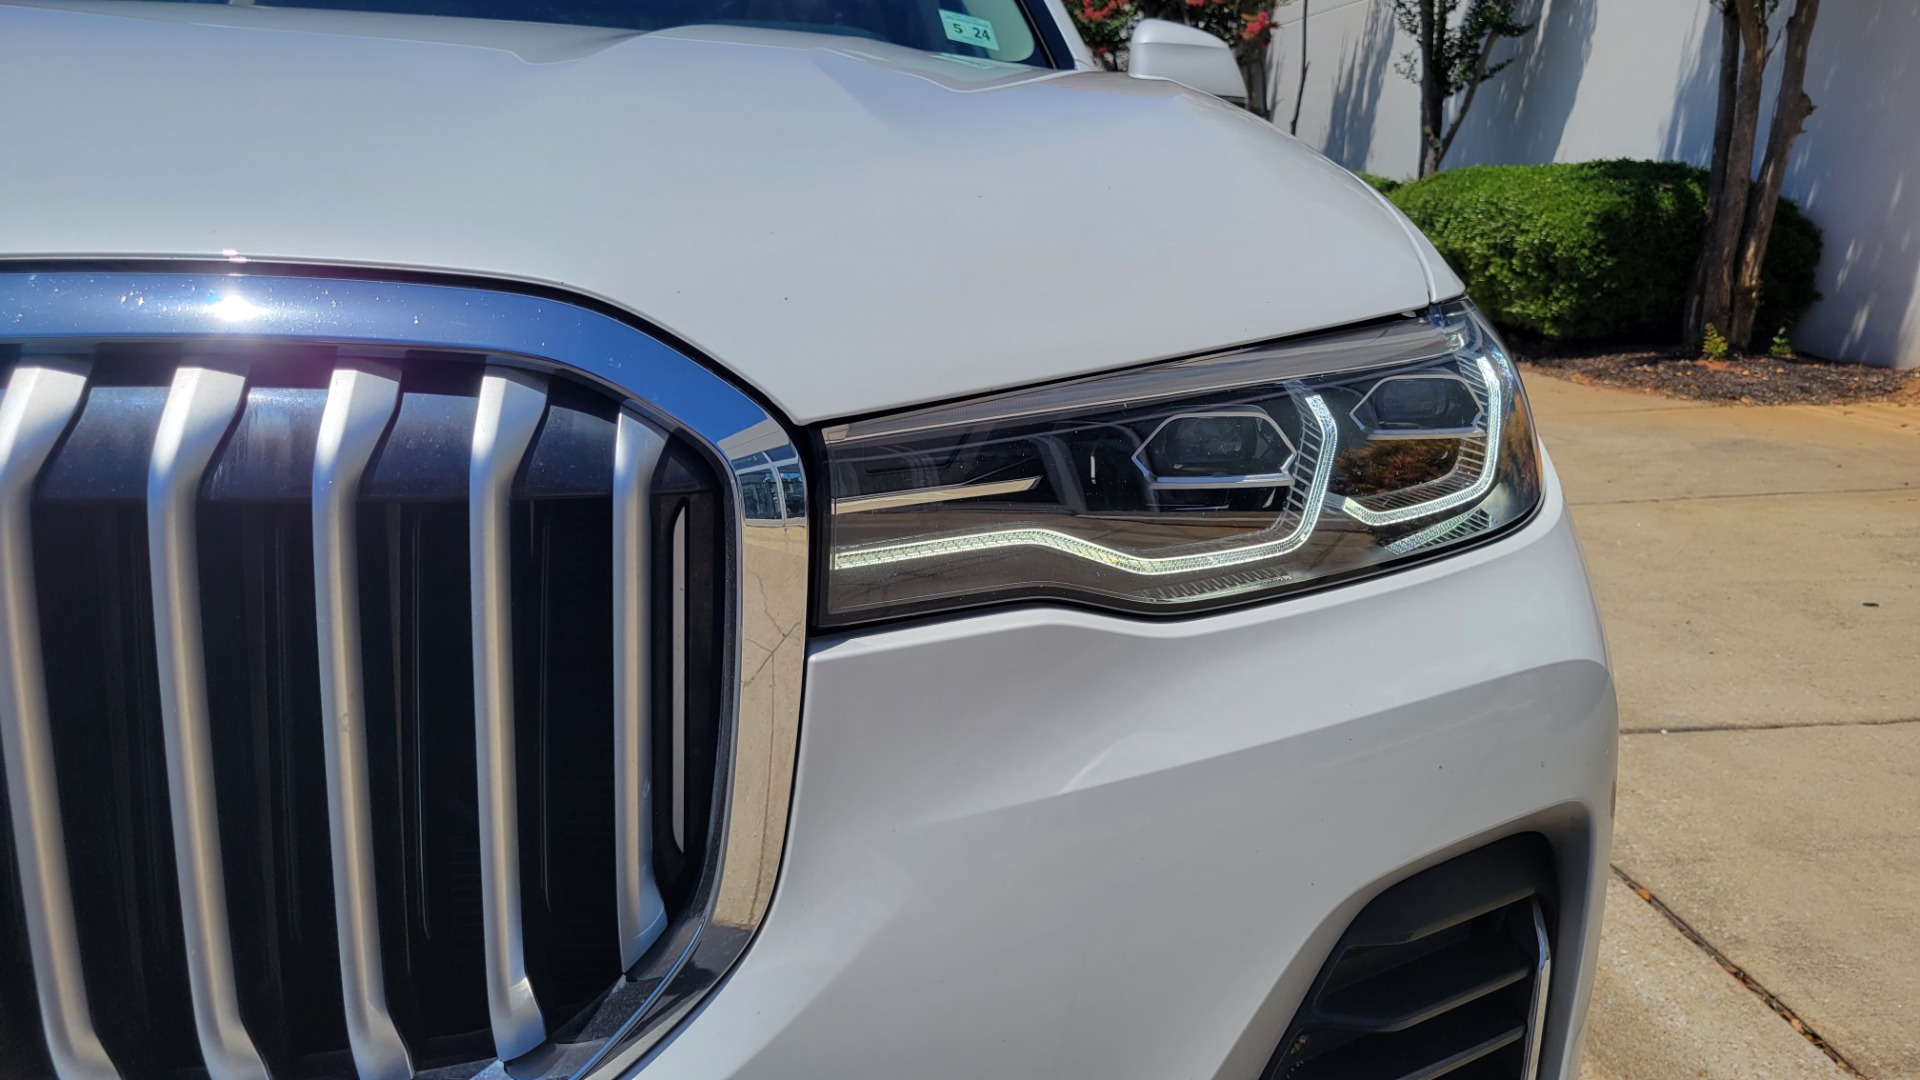 Used 2019 BMW X7 XDRIVE40I PREMIUM / NAV / HUD / PARK ASST PLUS / REMOTE START / 3D VIEW for sale $71,095 at Formula Imports in Charlotte NC 28227 35